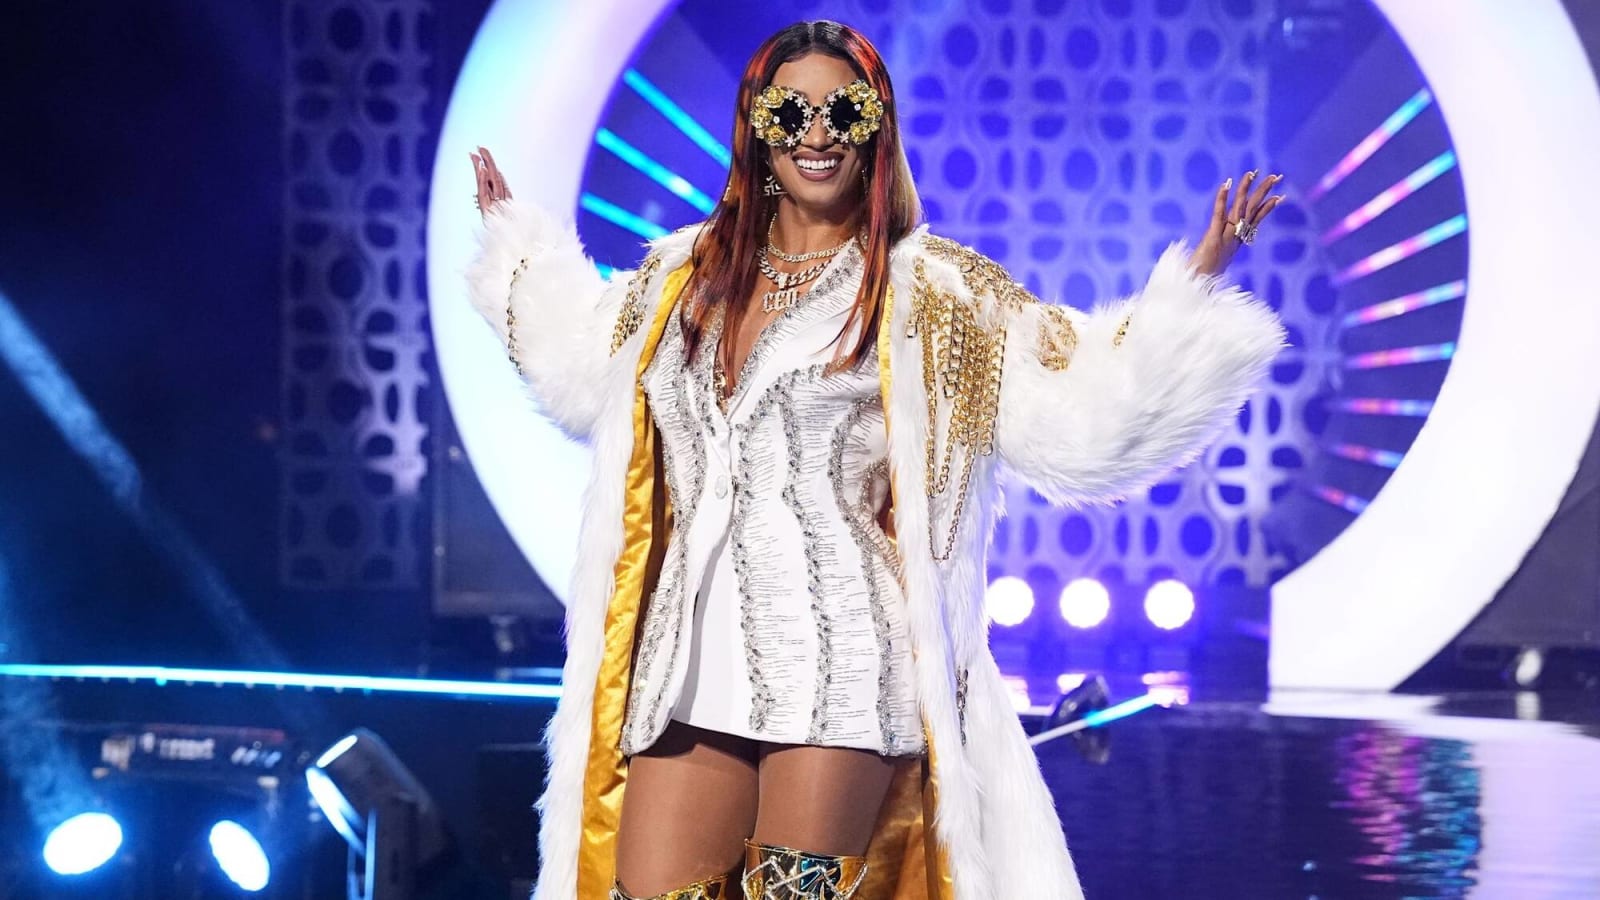 AEW Dynamite Ratings Disappoint Despite Expensive Additions of Mercedes Mone, Kazuchika Okada, and Will Ospreay to AEW Roster